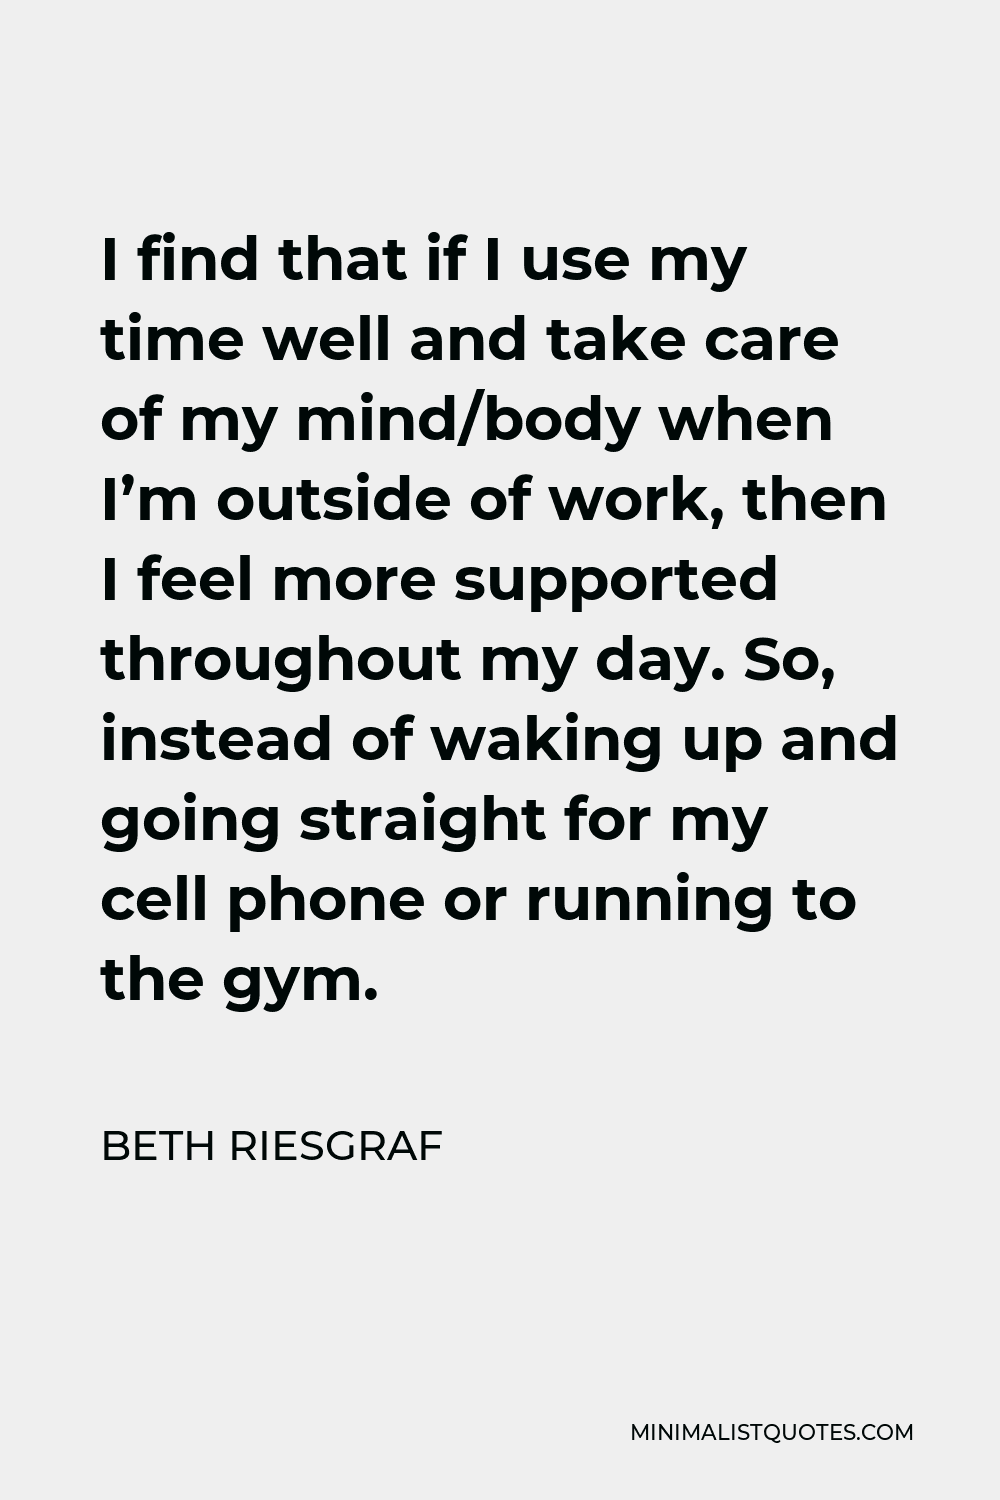 Beth Riesgraf Quote - I find that if I use my time well and take care of my mind/body when I’m outside of work, then I feel more supported throughout my day.